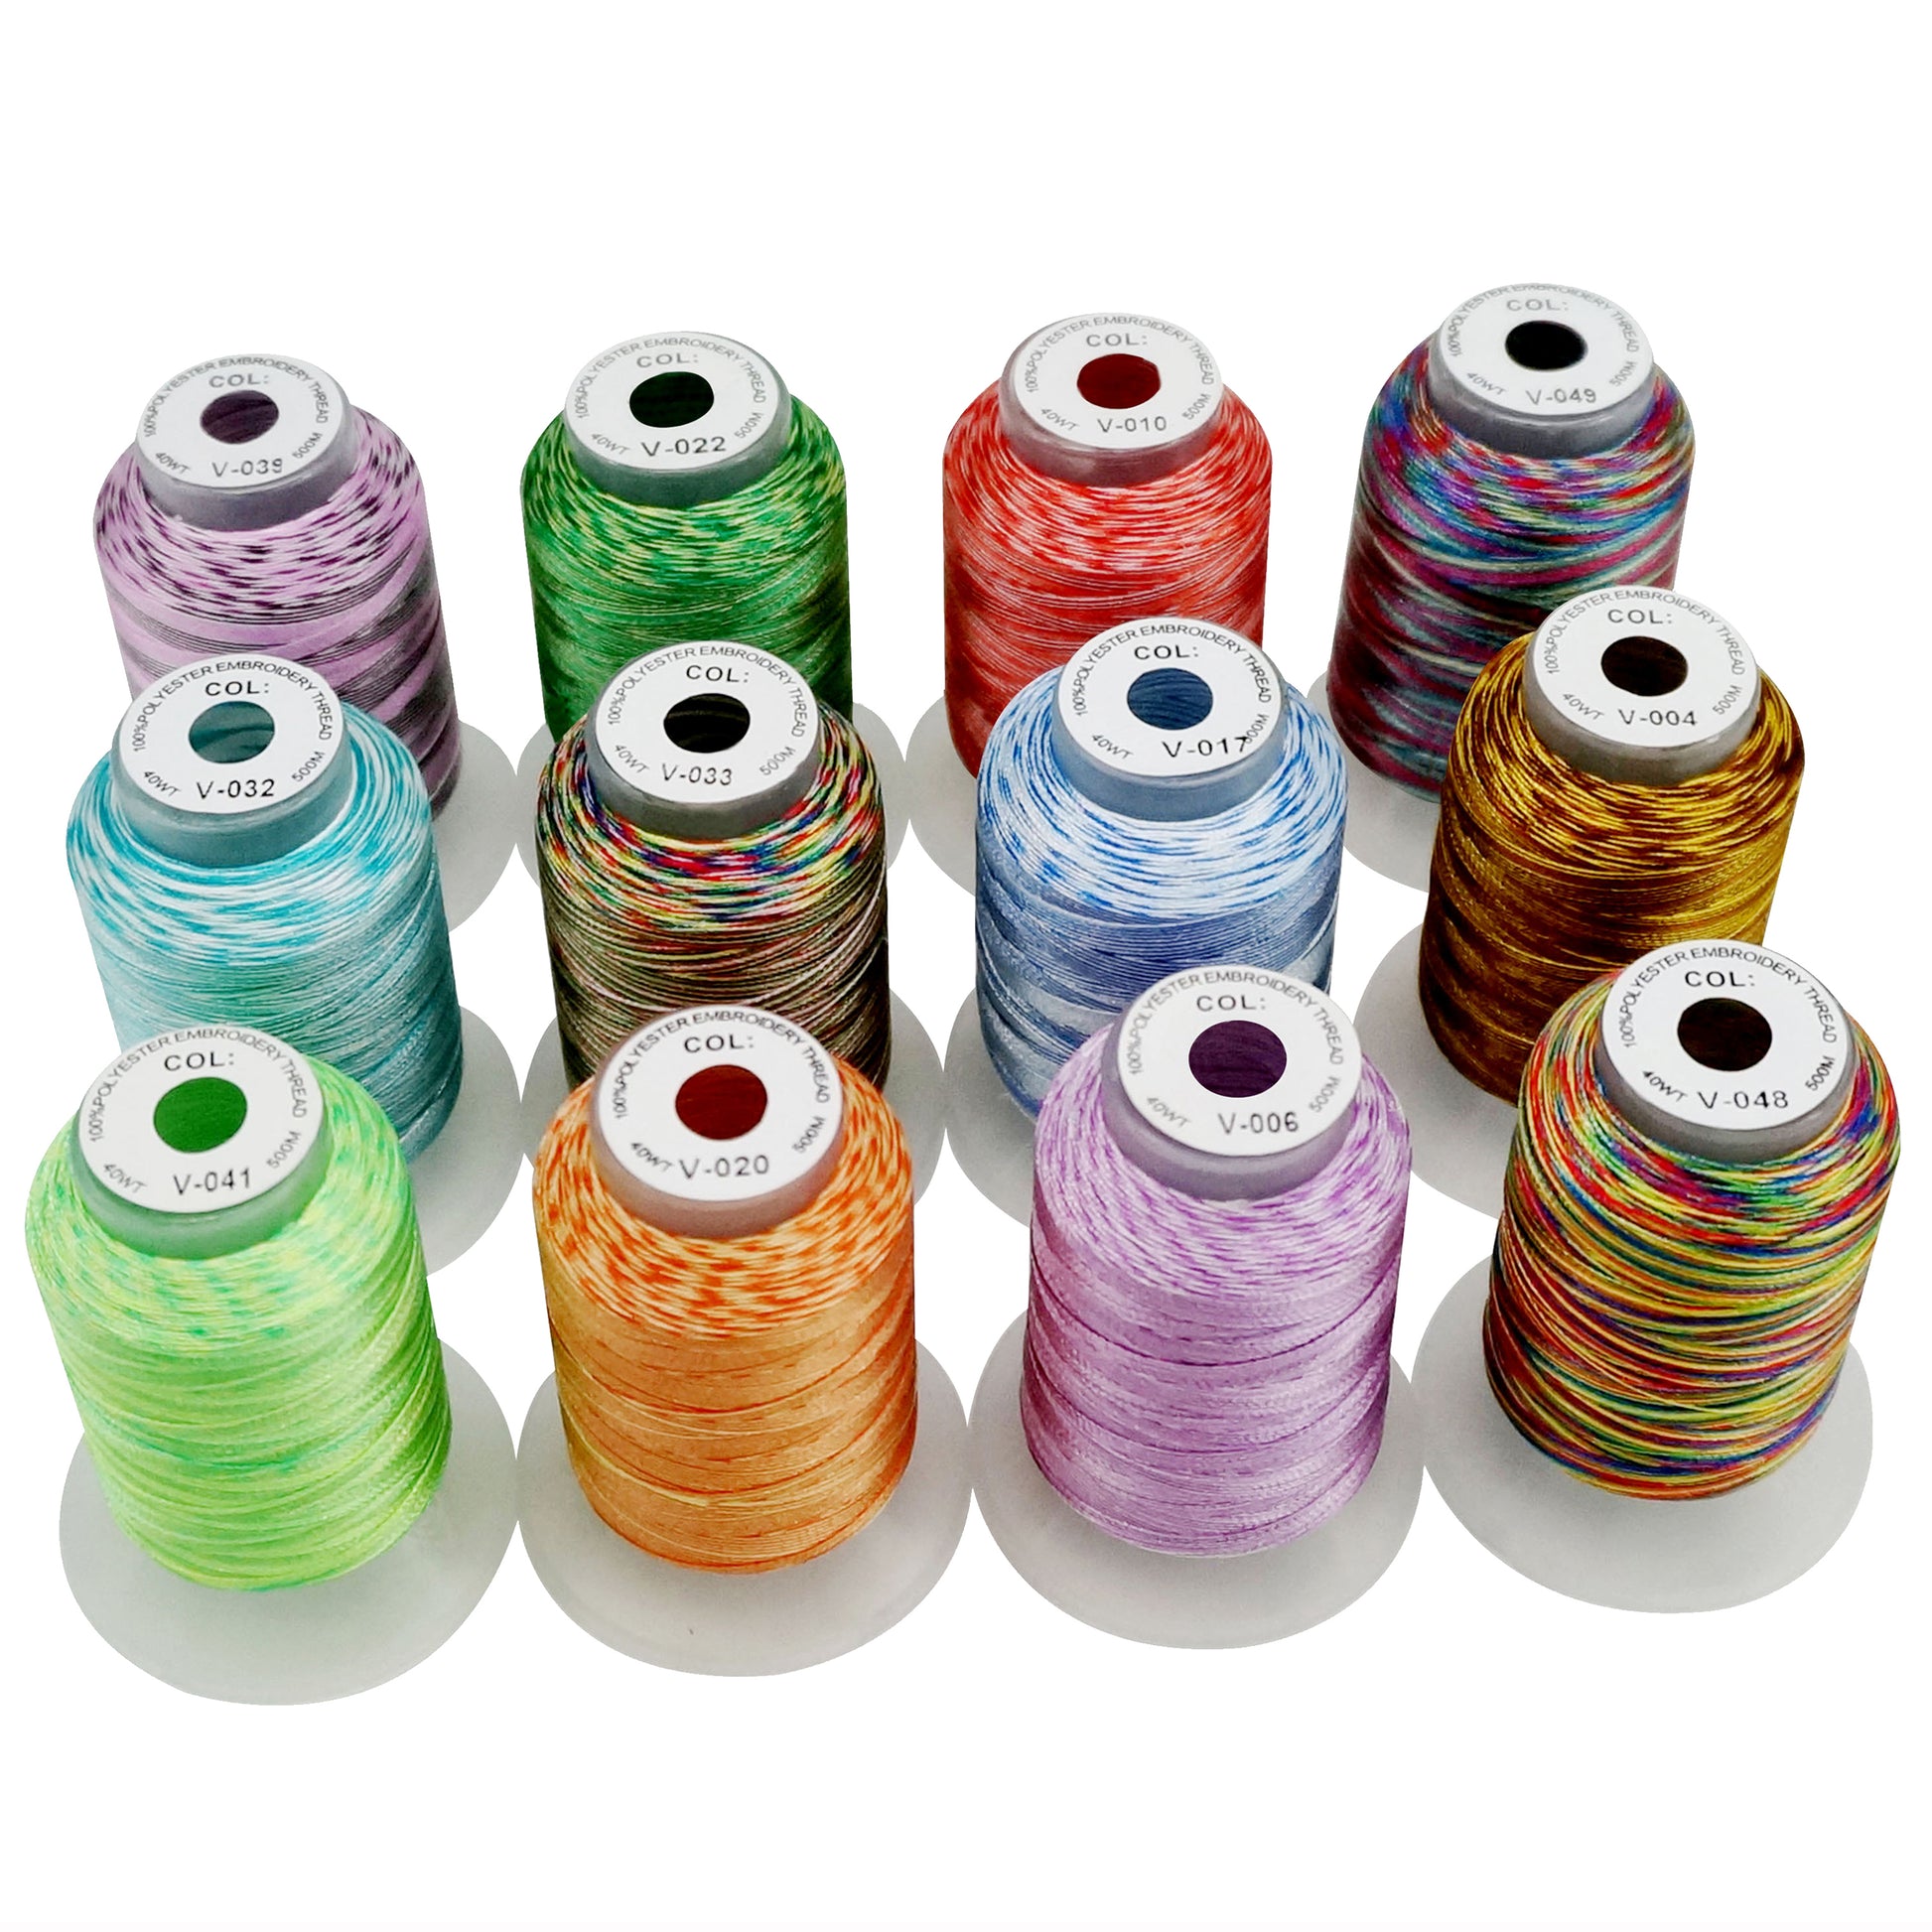 New brothread 30 Colors Polyester Embroidery Machine Thread Kit 500M (550Y)  Each